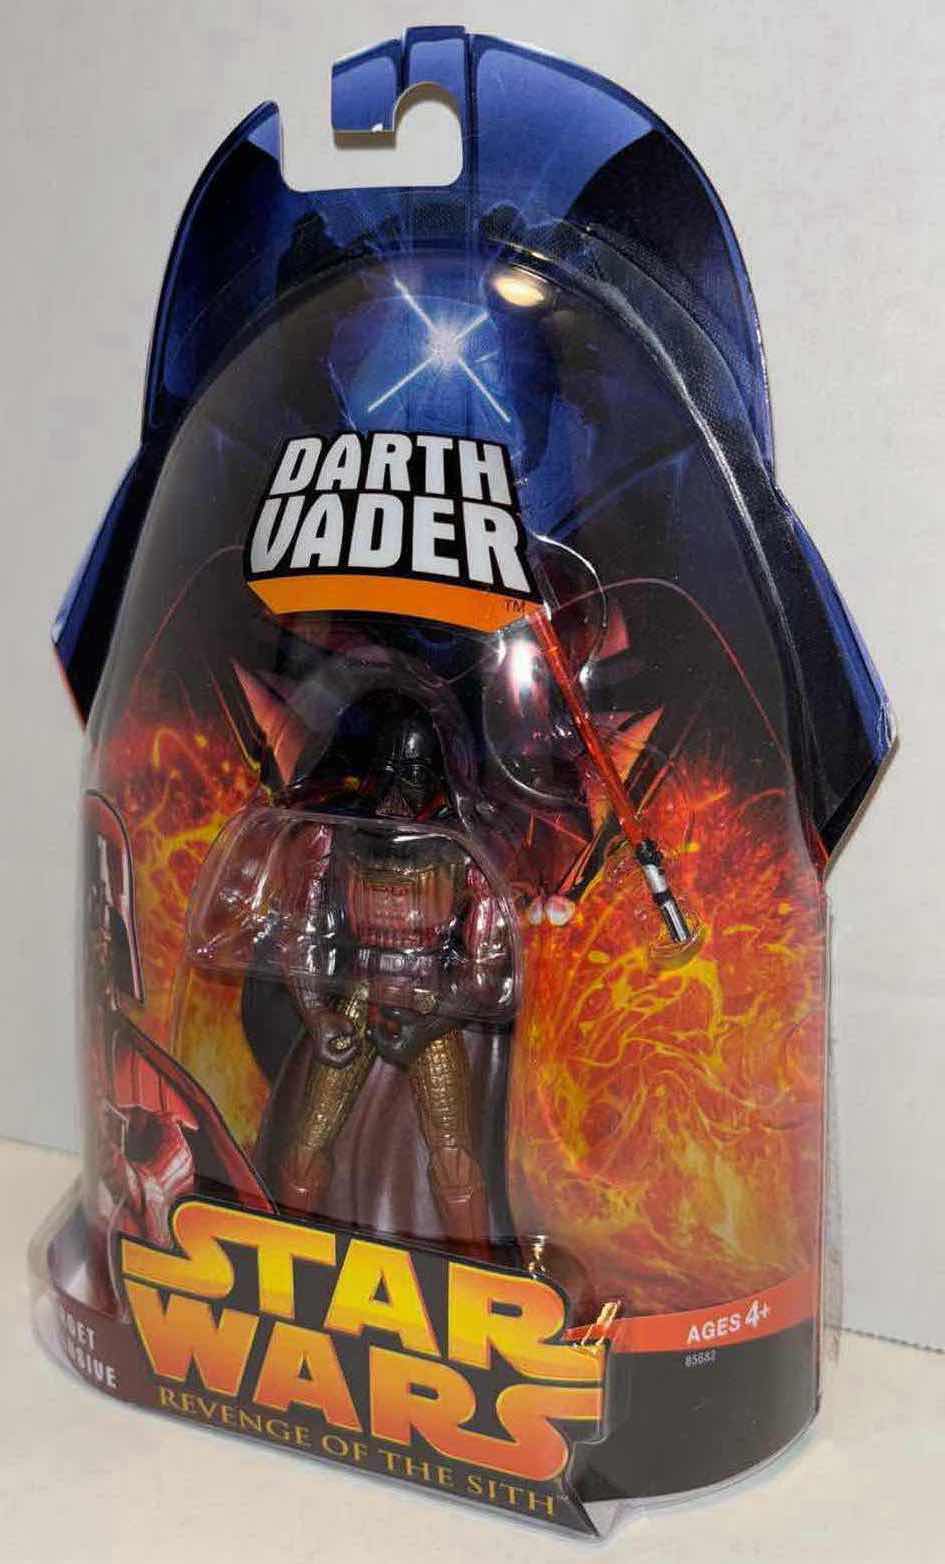 Photo 1 of NEW 2005 HASBRO STAR WARS REVENGE OF THE SITH TARGET EXCLUSIVE “DARTH VADER” ACTION FIGURE & ACCESSORIES, EXCLUSIVE COLLECTORS EDITION 1 of 50,000 IN CLEAR CLAMSHELL CASE